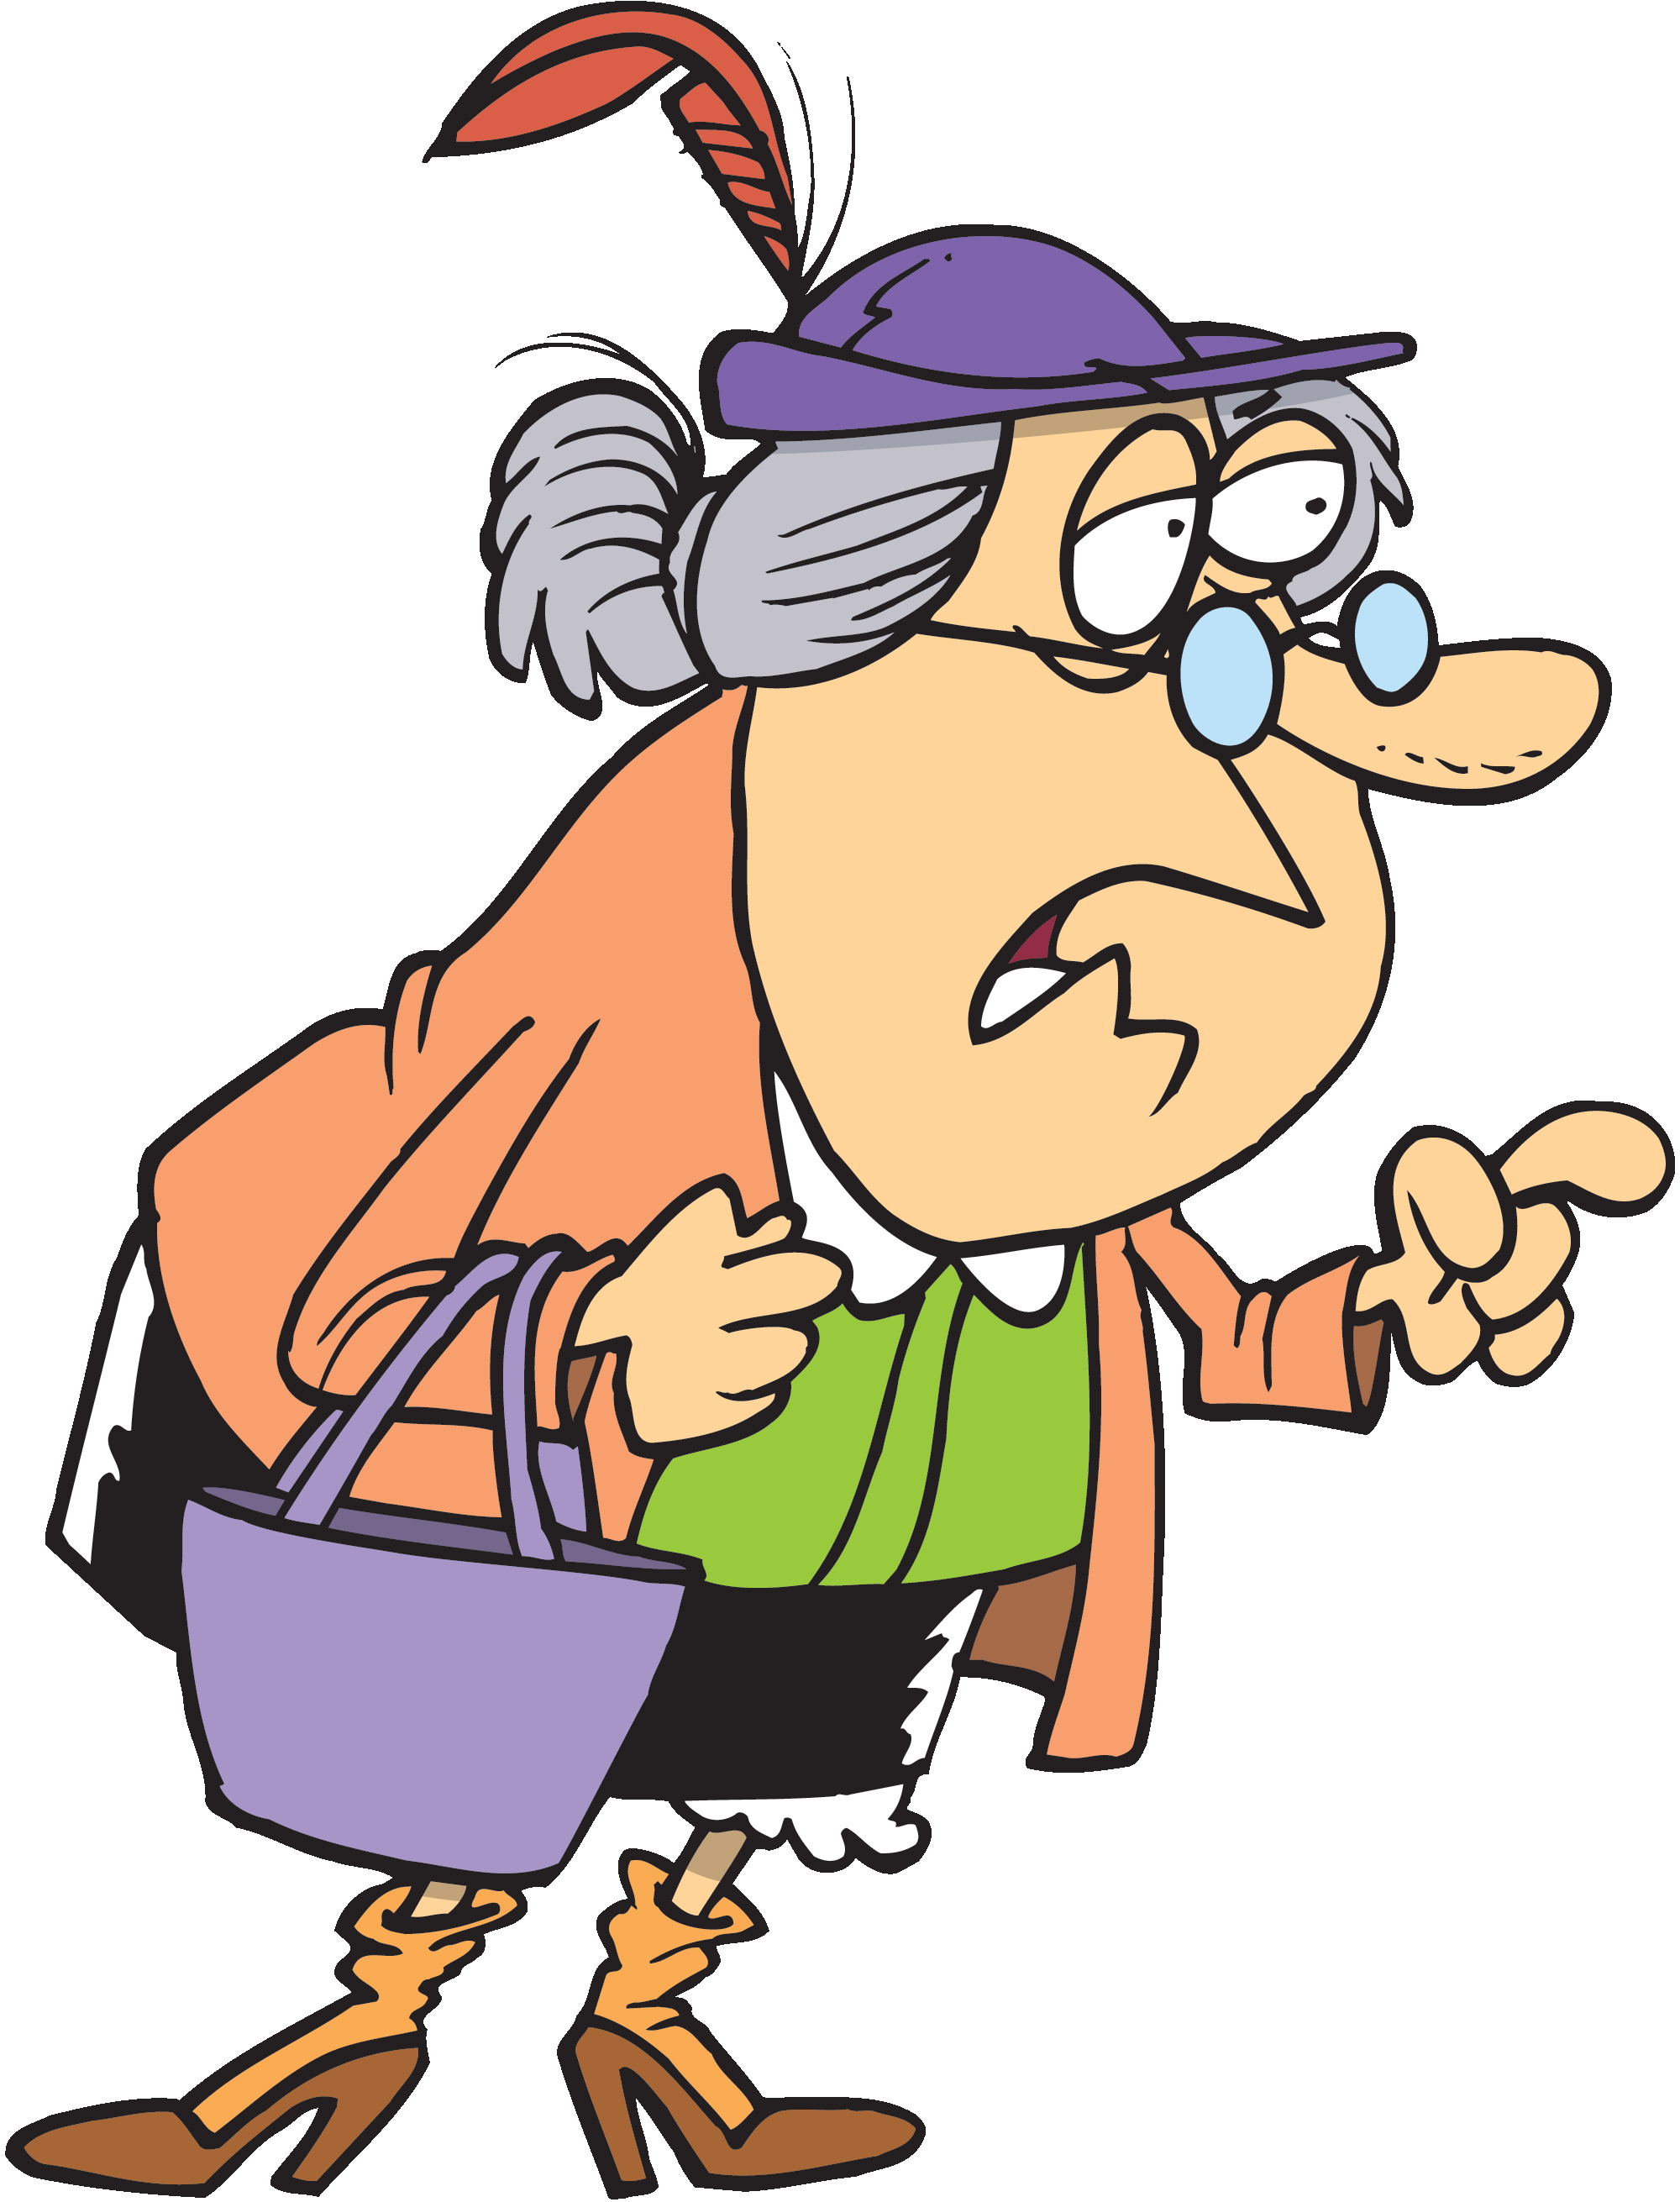 Cartoon Old Lady - ClipArt Best